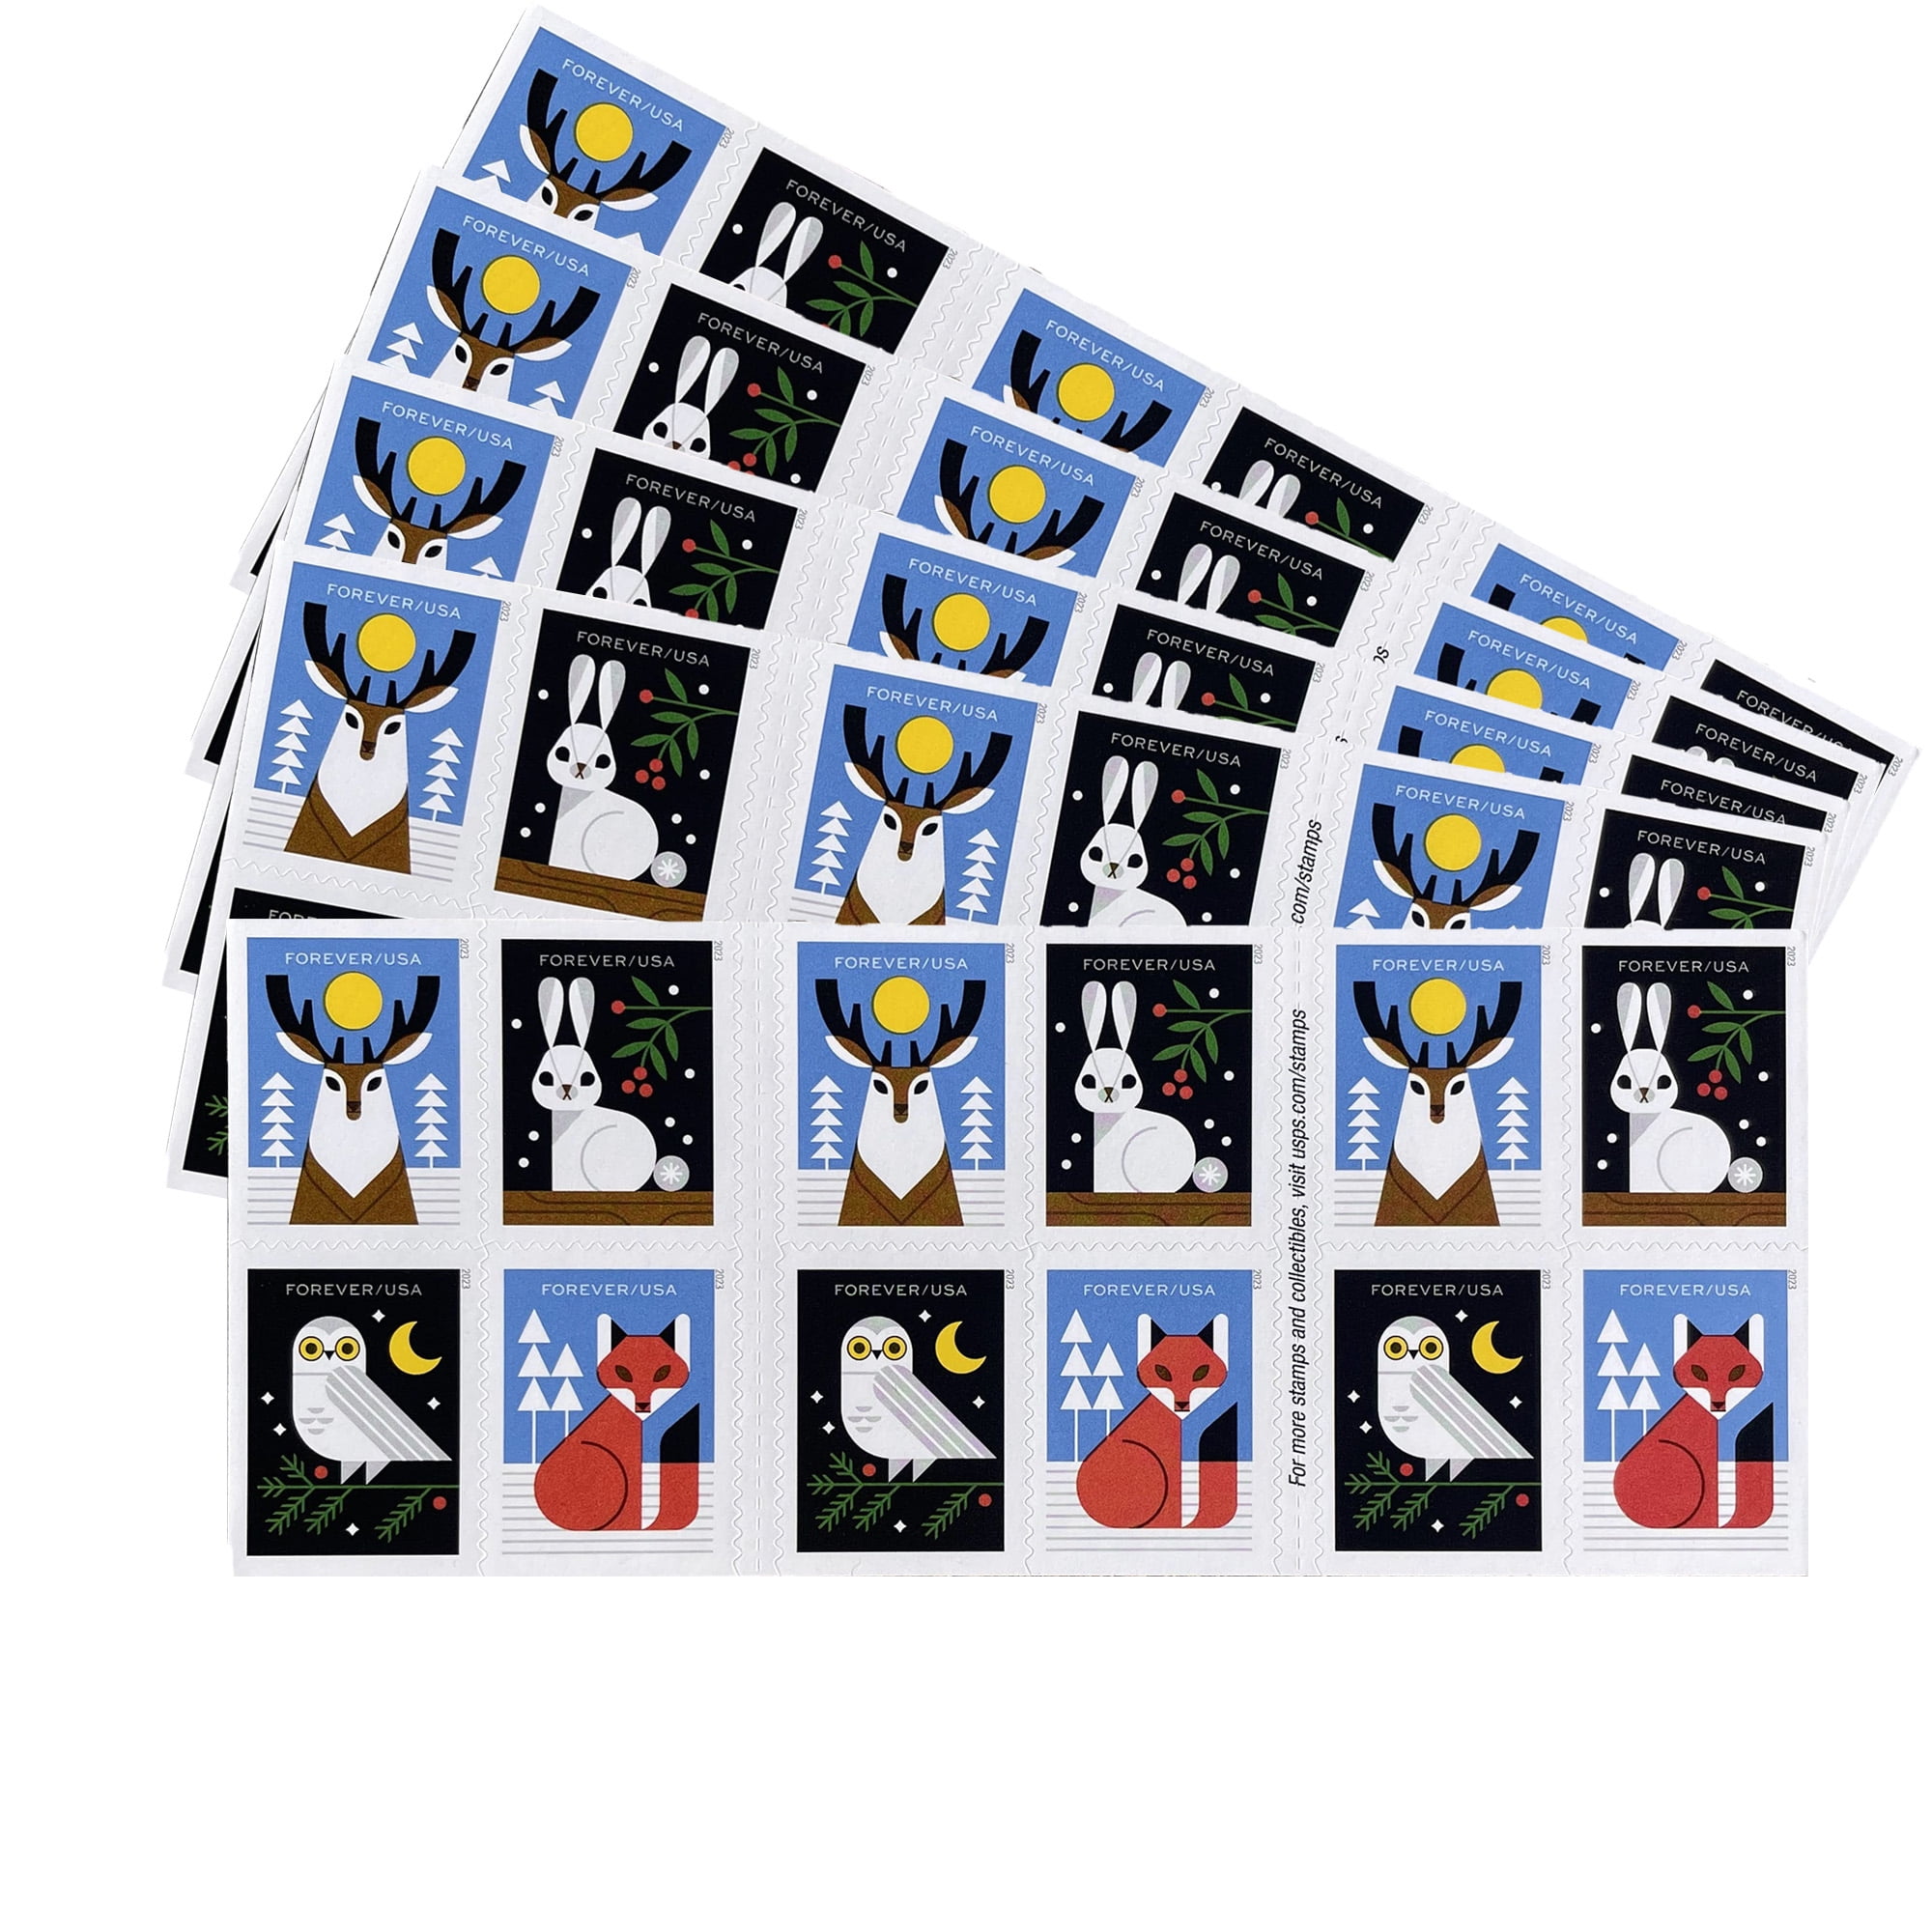 Winter Scenes USPS Forever Postage Stamps 2 Books of 20 First Class US Postal Holiday Celebrations Wedding Celebration Anniversary Traditions (40